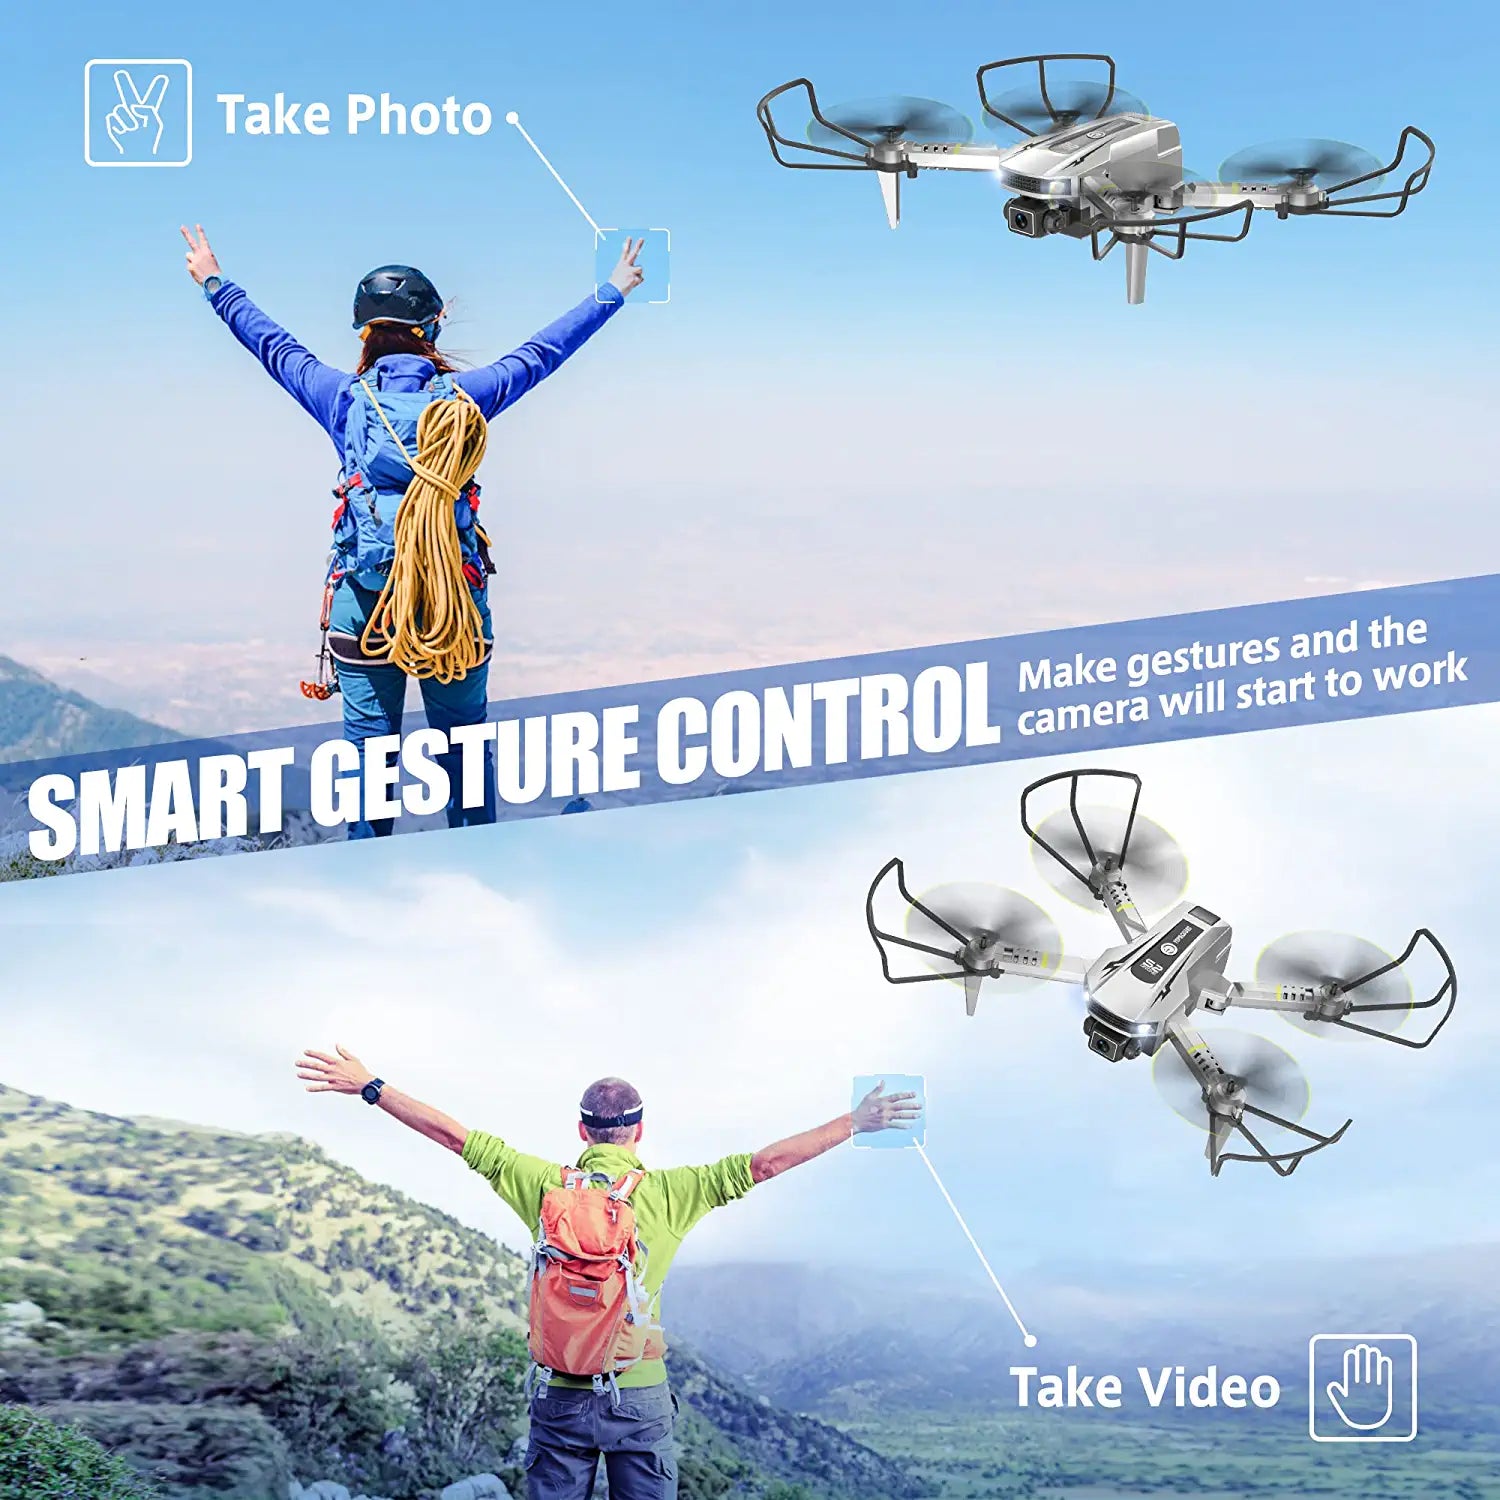 TOPRCBOXS S2 Mini Drone - for Kids with 1080P HD Camera, FPV Quadcopter Cool Toys Gifts for Teenage Boys RC Camera Drone with Altitude Hold 2 Batteries - RCDrone